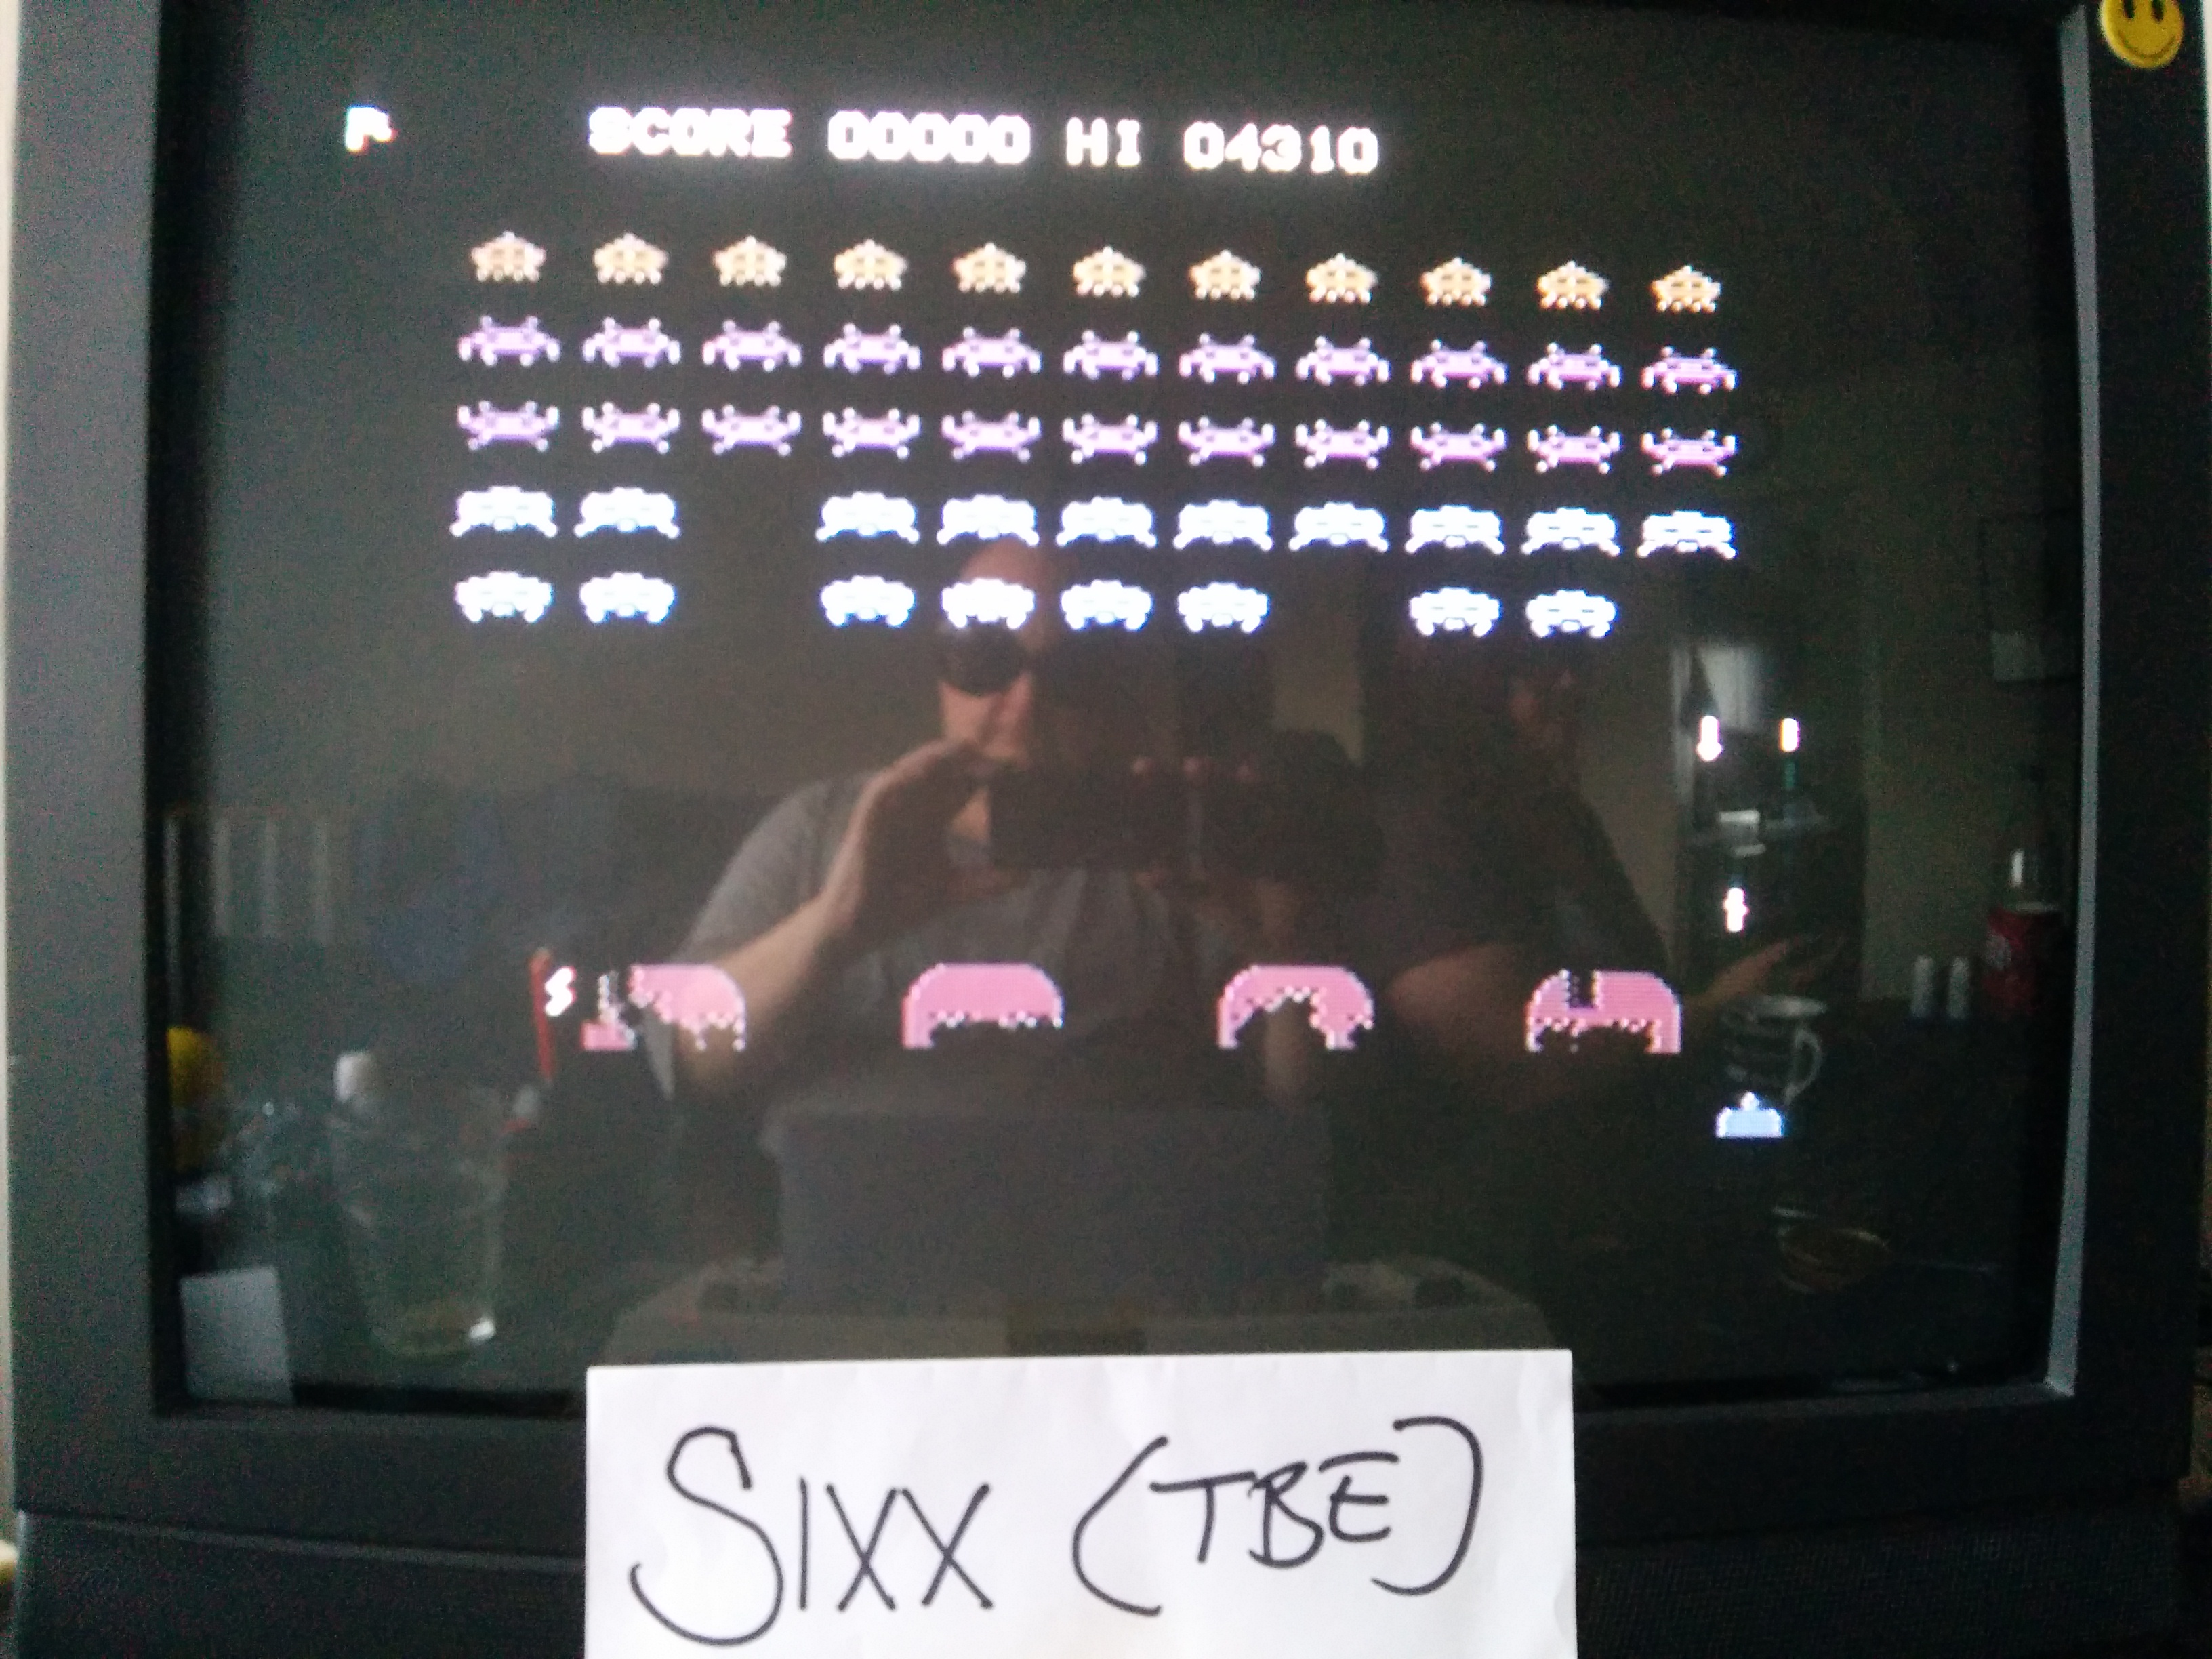 Sixx: Avenger [Commodore] (Commodore 64) 4,310 points on 2014-04-22 01:31:53